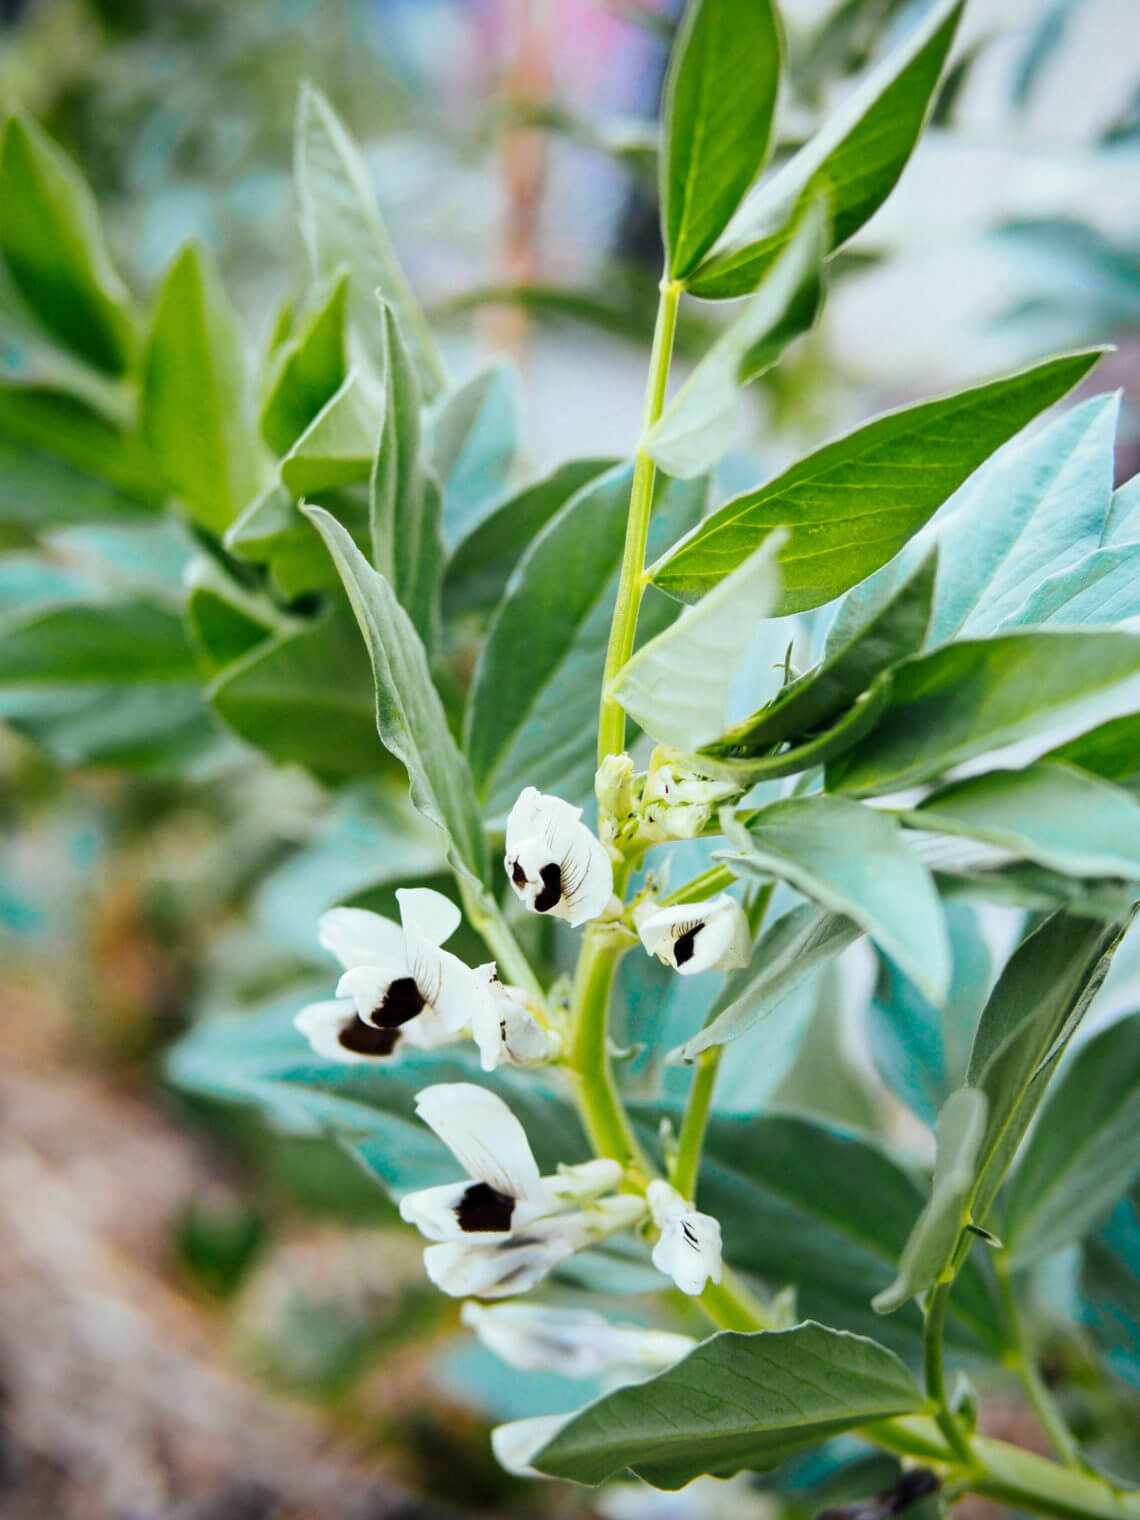 How to prune, harvest, and eat fava bean leaves and flowers